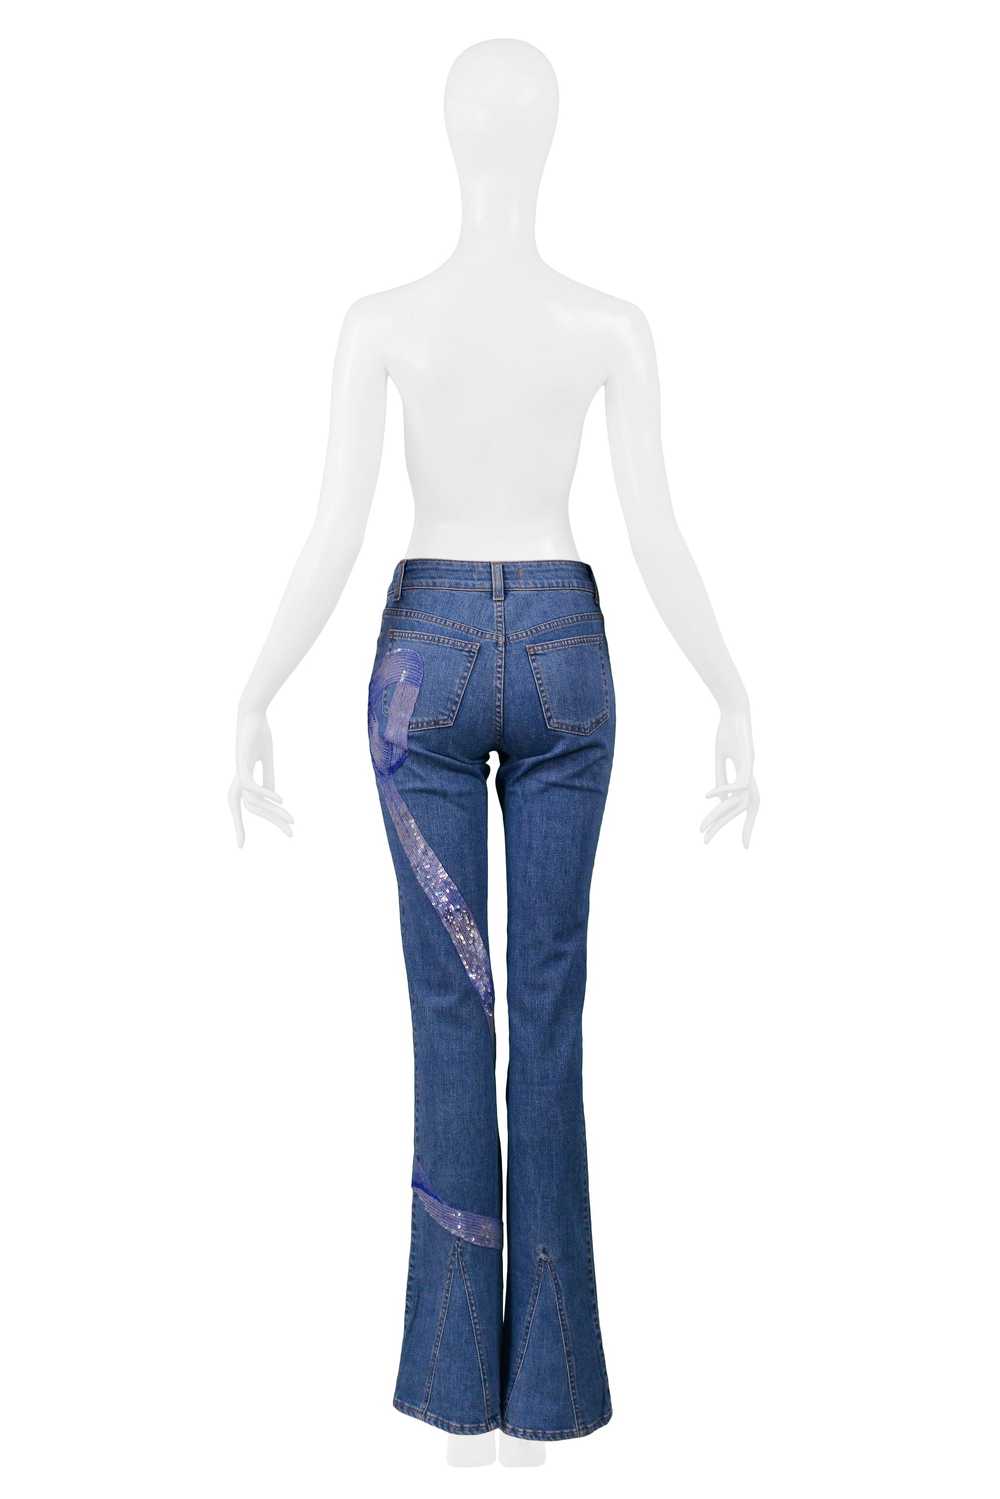 VALENTINO SEQUIN BOW PRINT JEANS 2006 - image 5